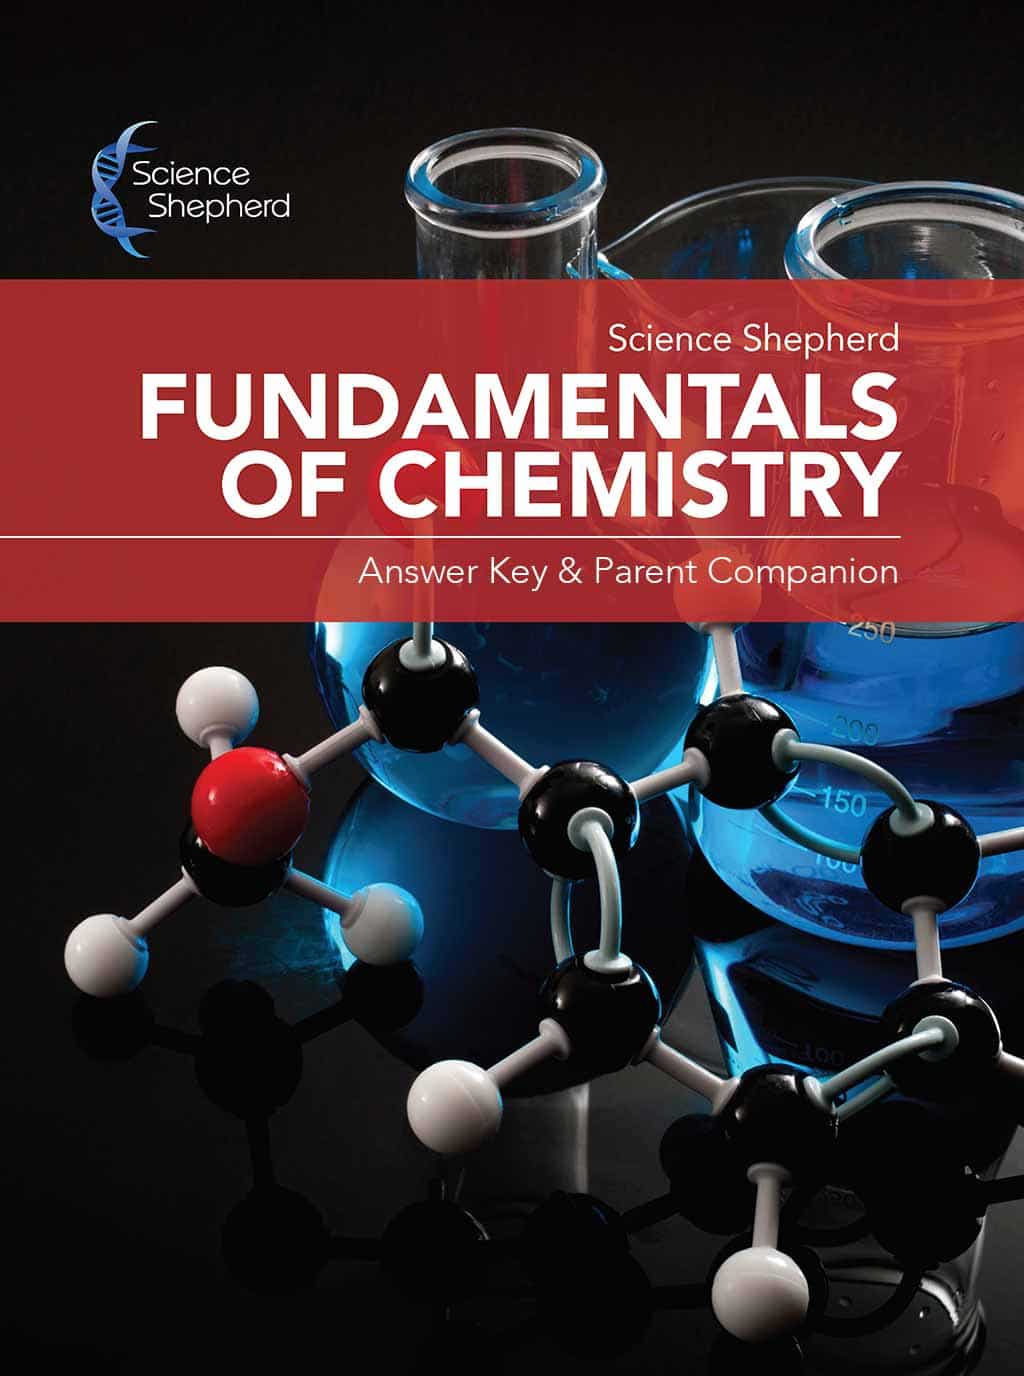 Fundamentals of Chemistry curriculum homeschool parent guide cover